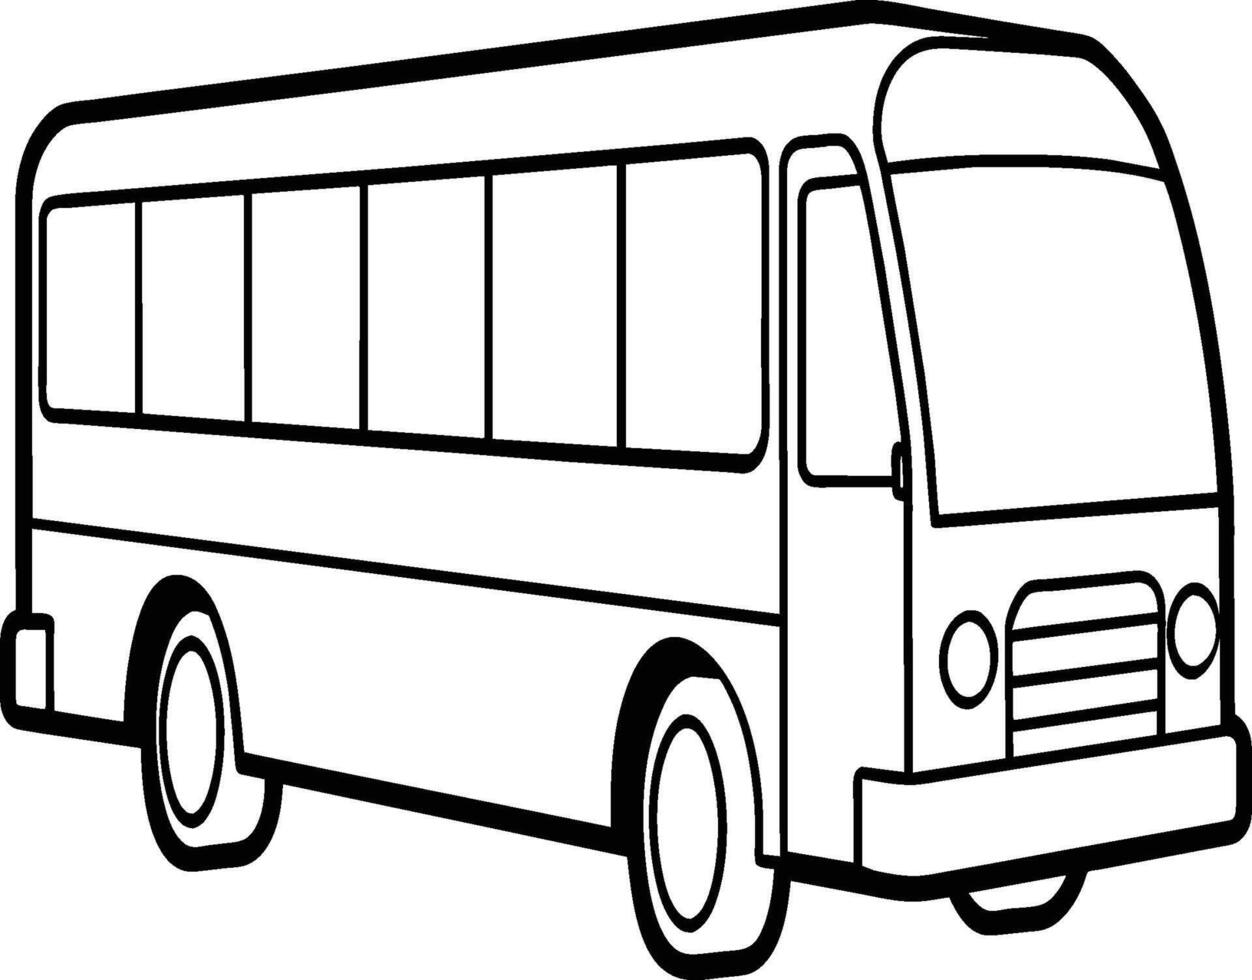 Bus coloring pages. Vehicles line art for coloring book. vector